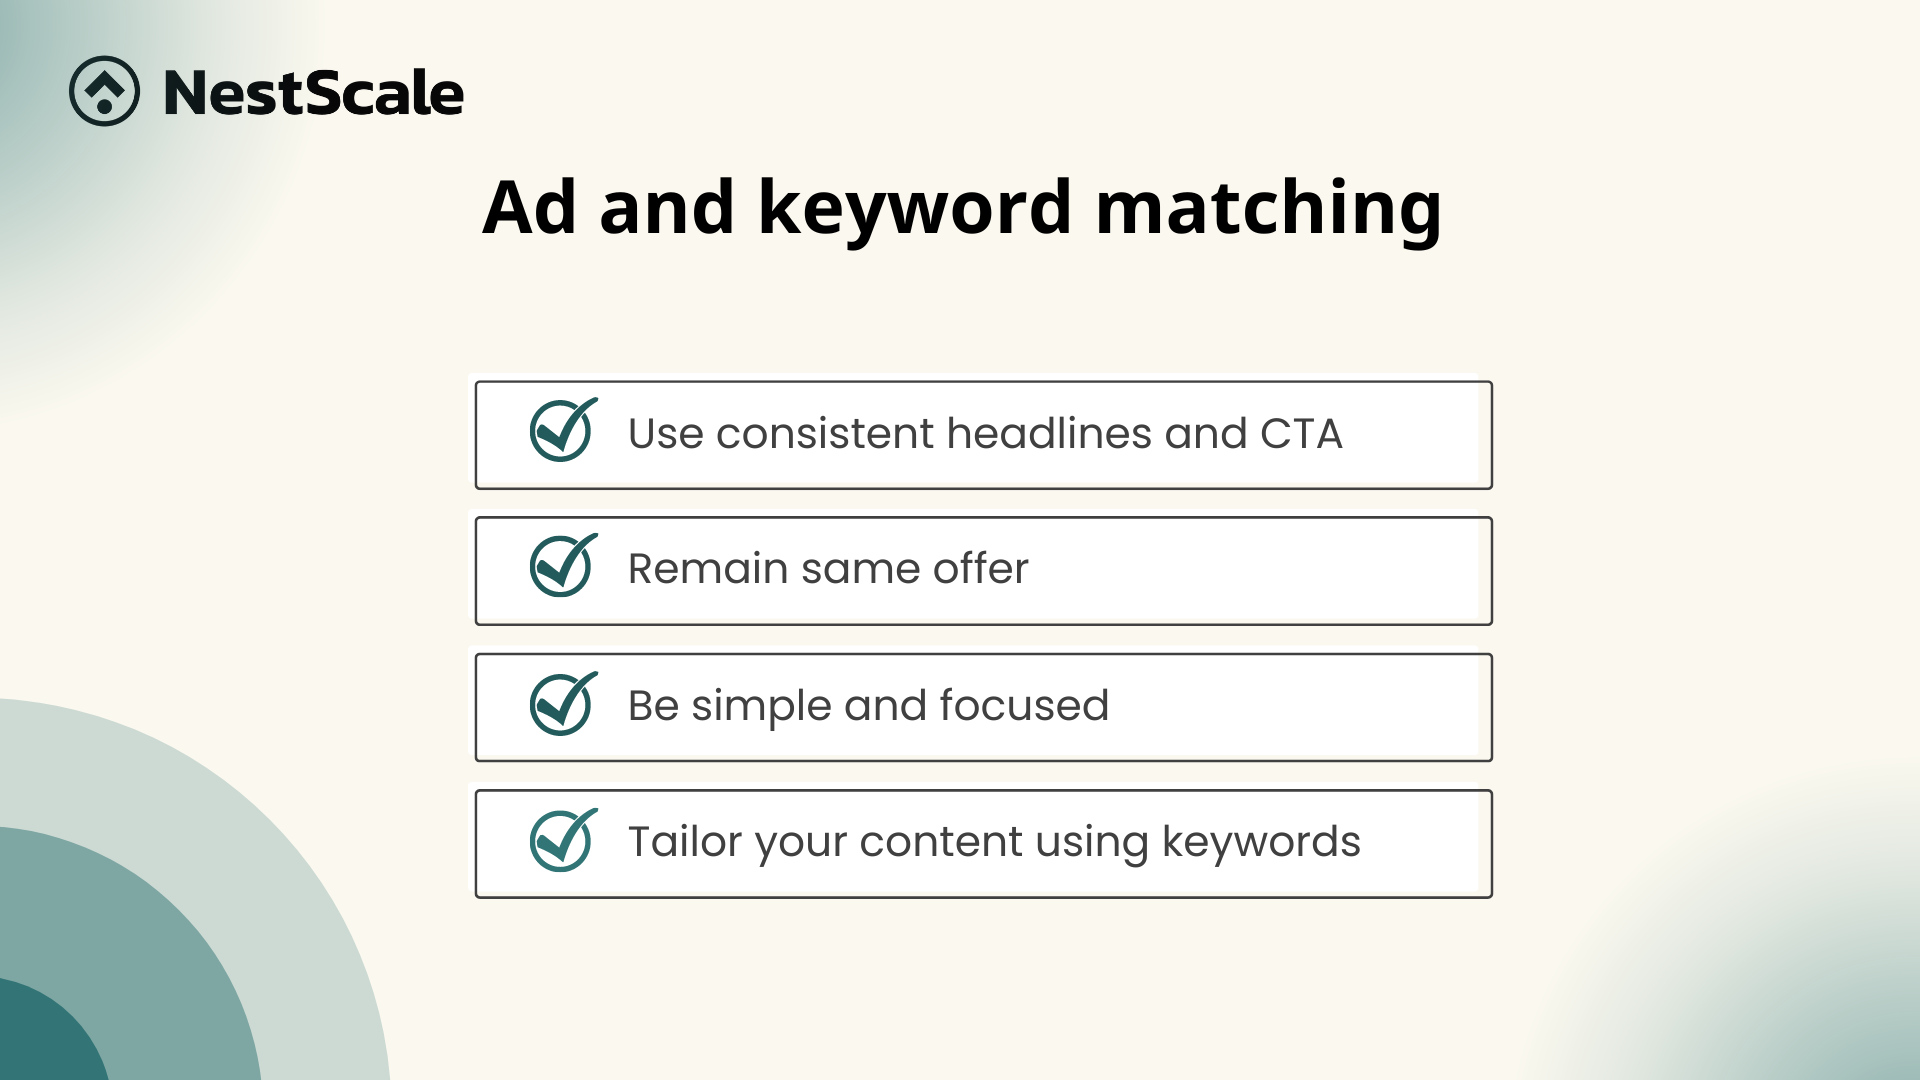 about ad and keyword matching